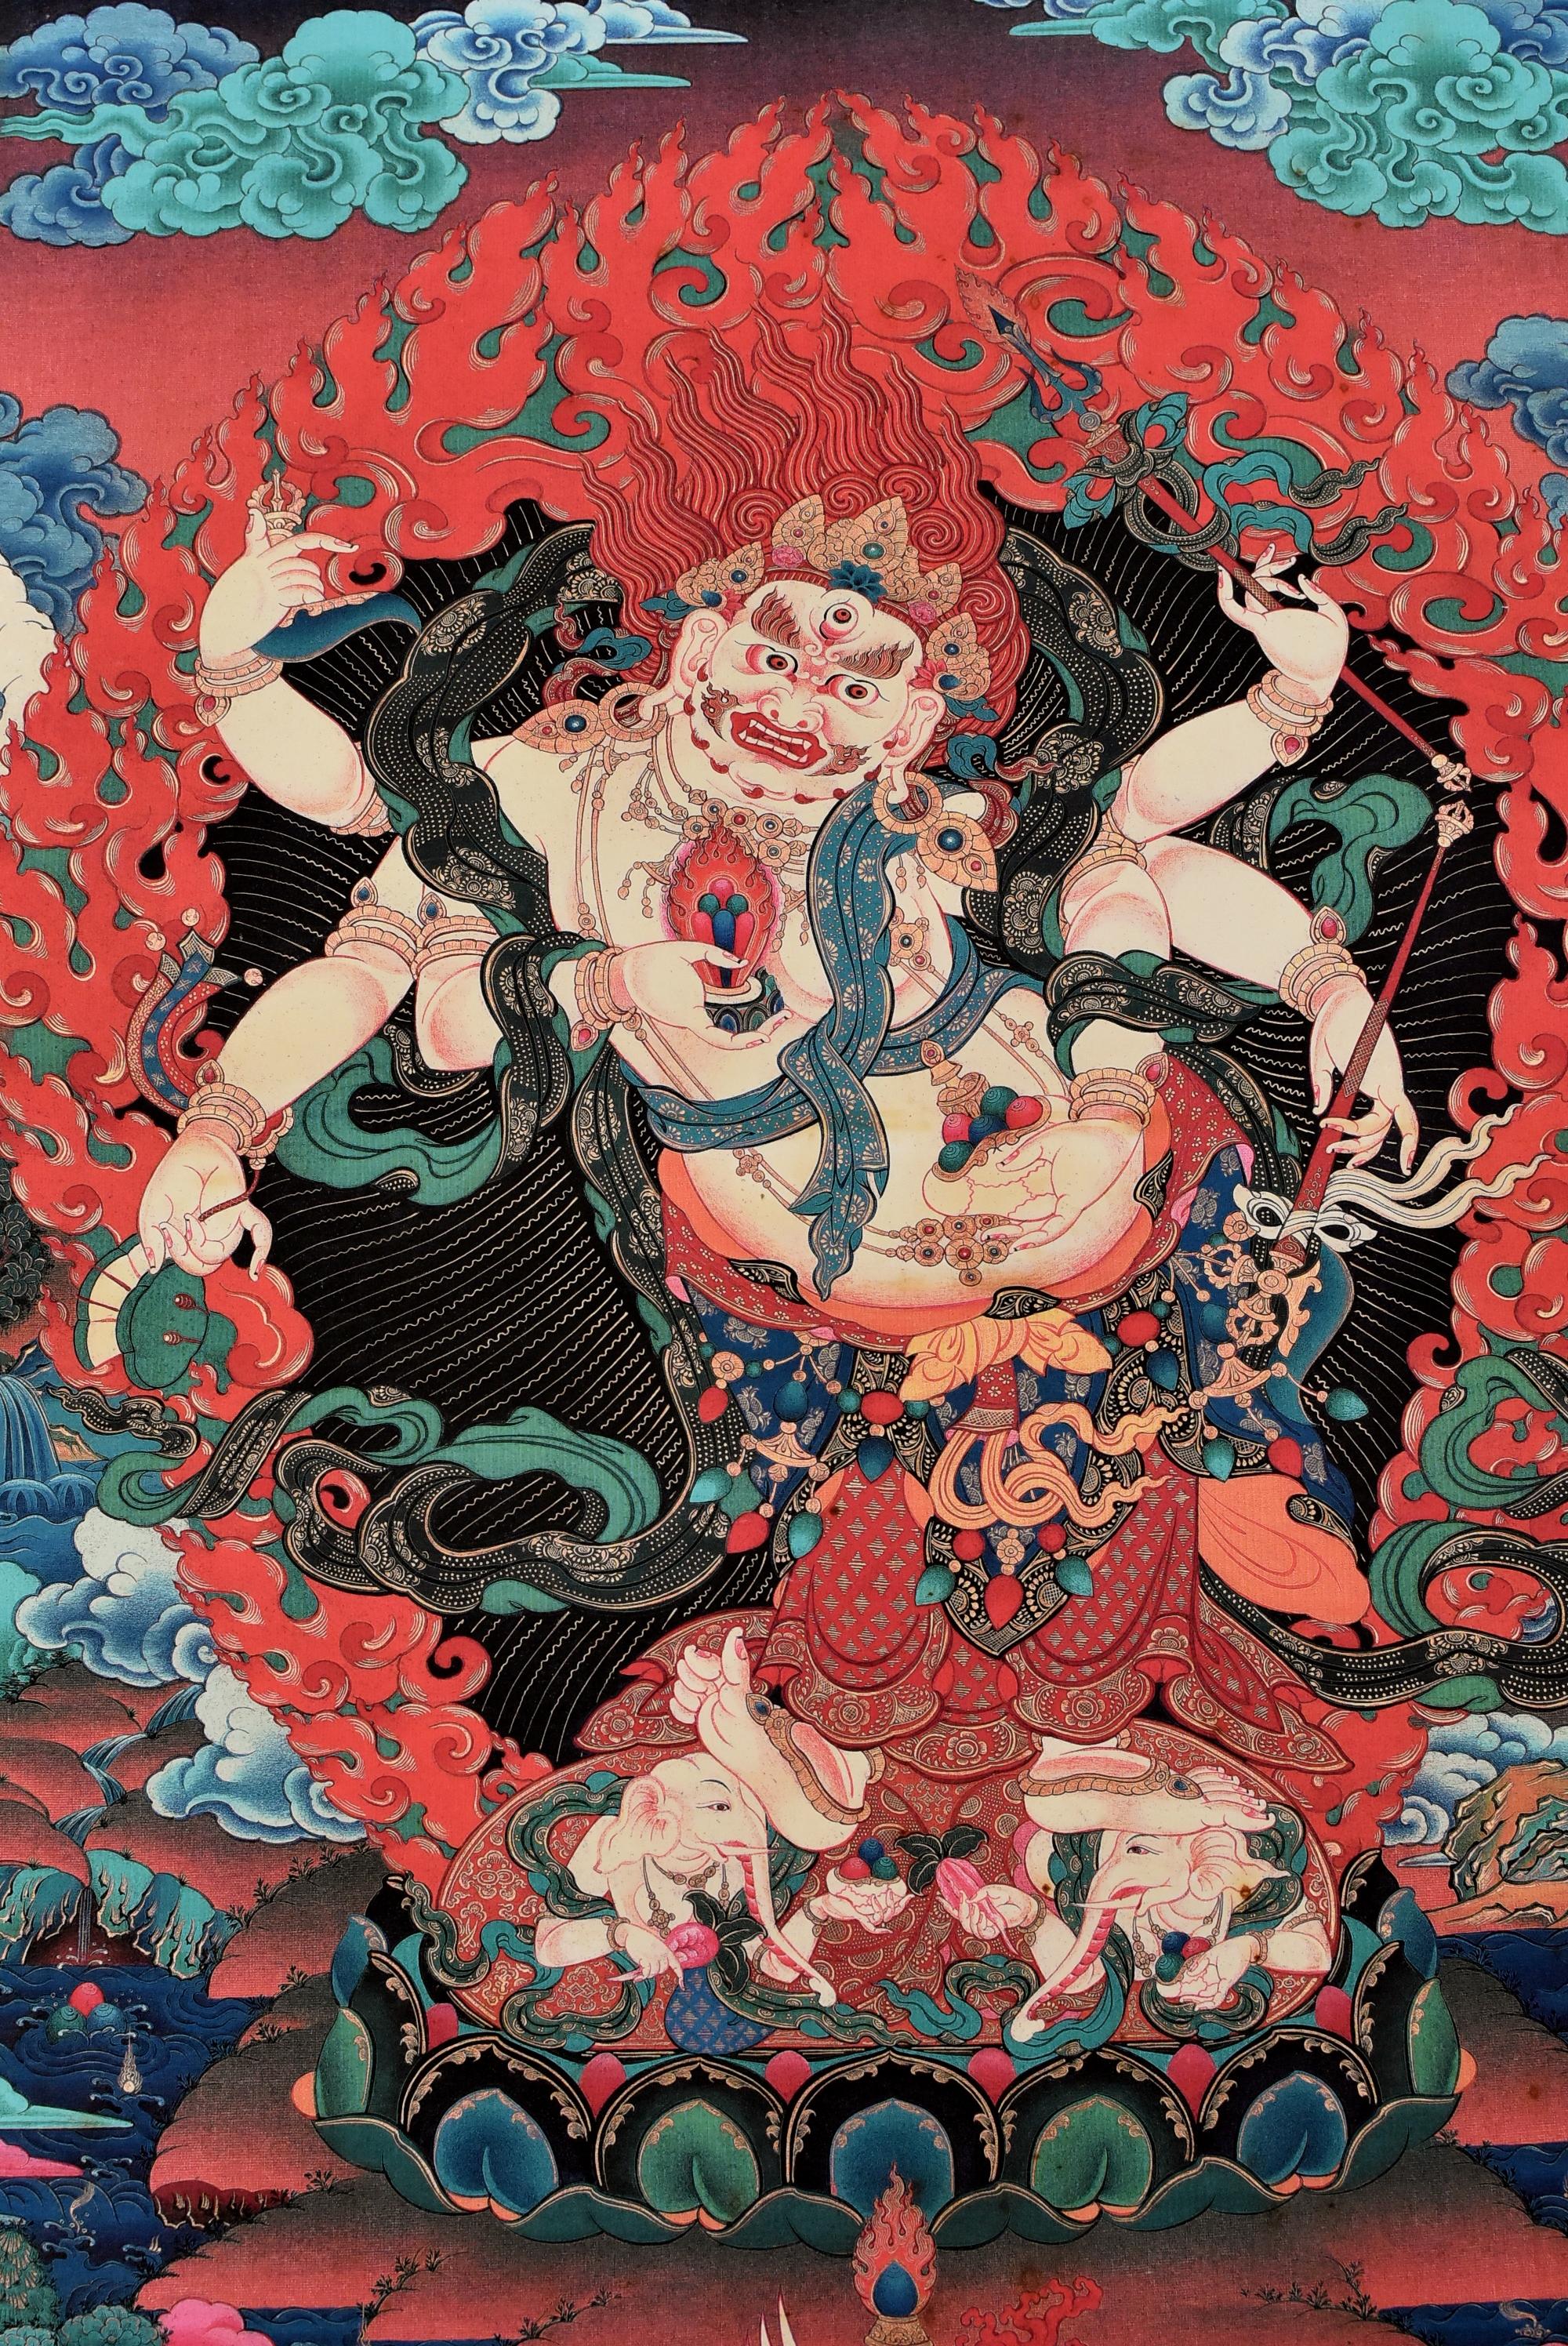 An absolutely brilliant Thangka painting. This piece depicts the protection god Hayagriva whose ferocious expression and power subdues negative and demonic forces. Hayagriva is a Buddhist deity whose practices are found ranging from simple forms to